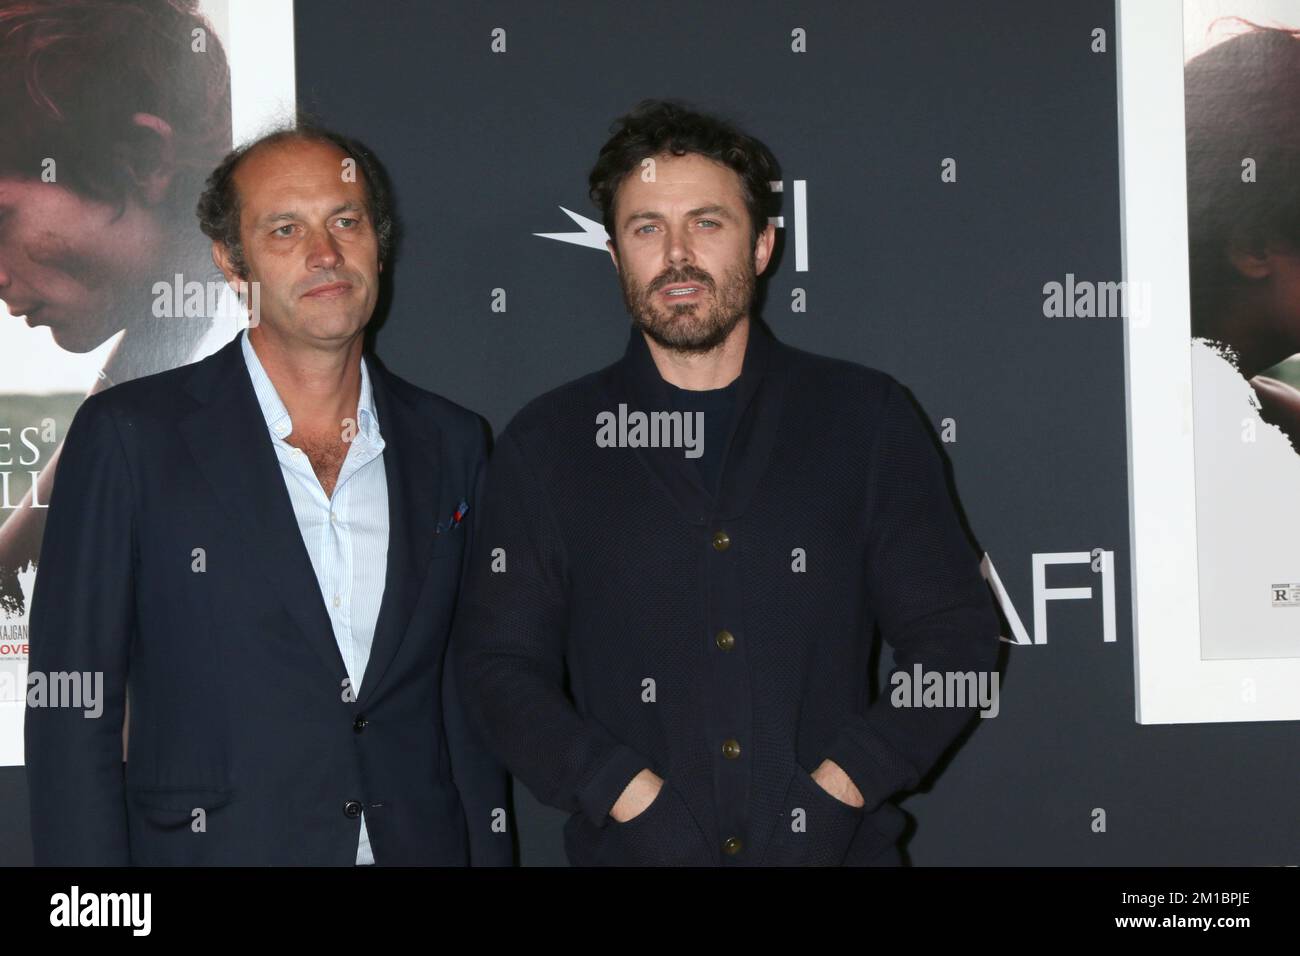 AFI Fest - Bones And All Special Screeningat TCL Chinese Theater IMAX on November 5, 2022 in Los Angeles, CA Featuring: Francesco Melzi d'Eril, Casey Affleck Where: Los Angeles, California, United States When: 06 Nov 2022 Credit: Nicky Nelson/WENN Stock Photo